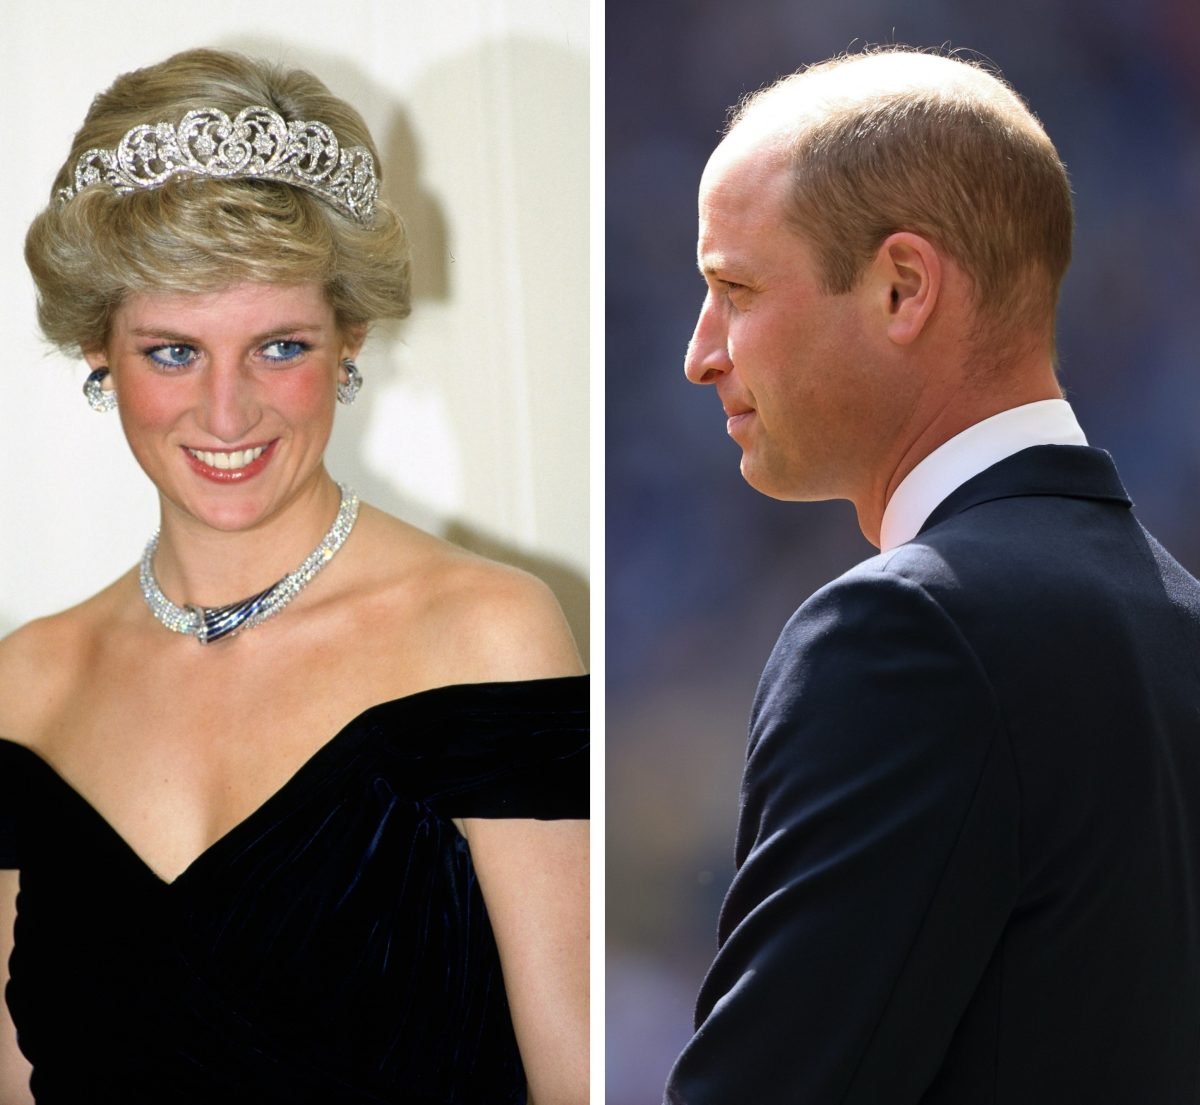 (L) Princess Diana at a banquet in Germany, (R) Prince William watching a soccer match in London